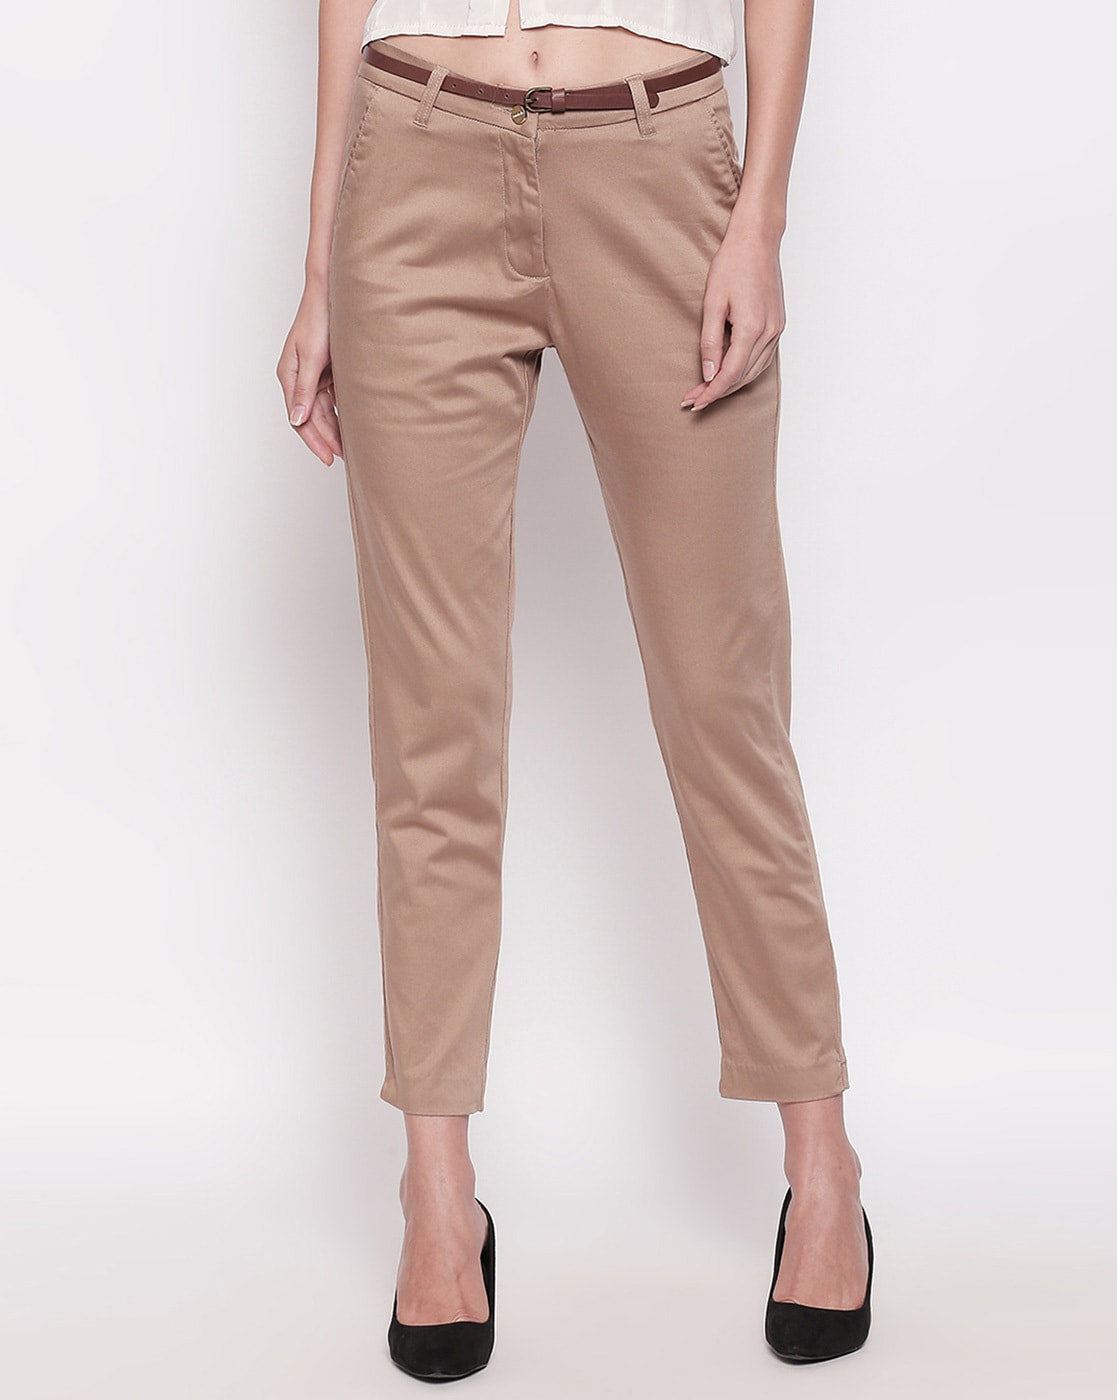 Buy KHAKI Trousers  Pants for Women by Annabelle by Pantaloons Online   Ajiocom